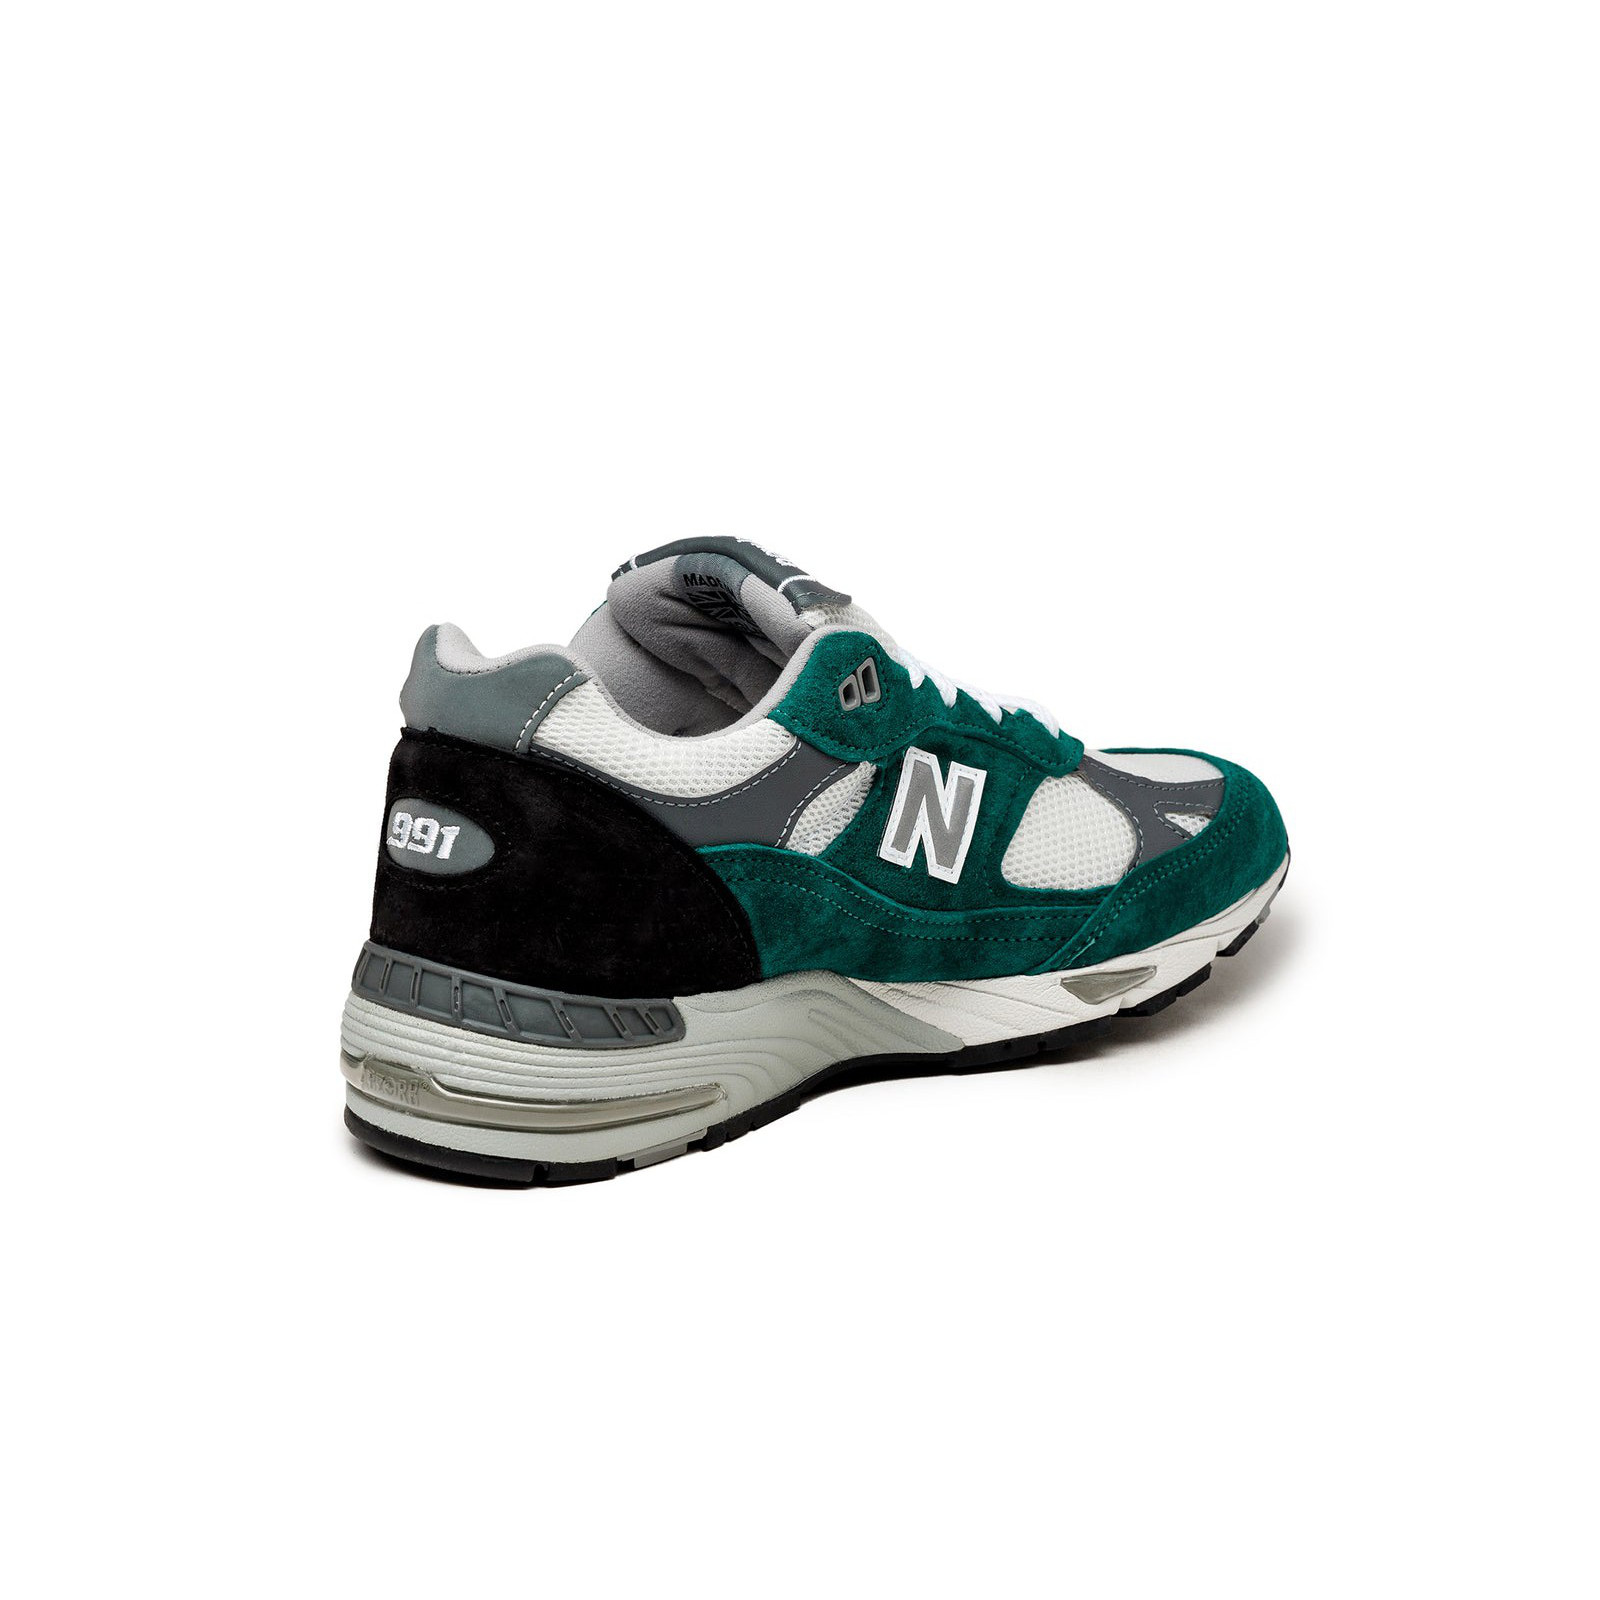 New Balance W991TLK
Made in England
Pacific / Alloy